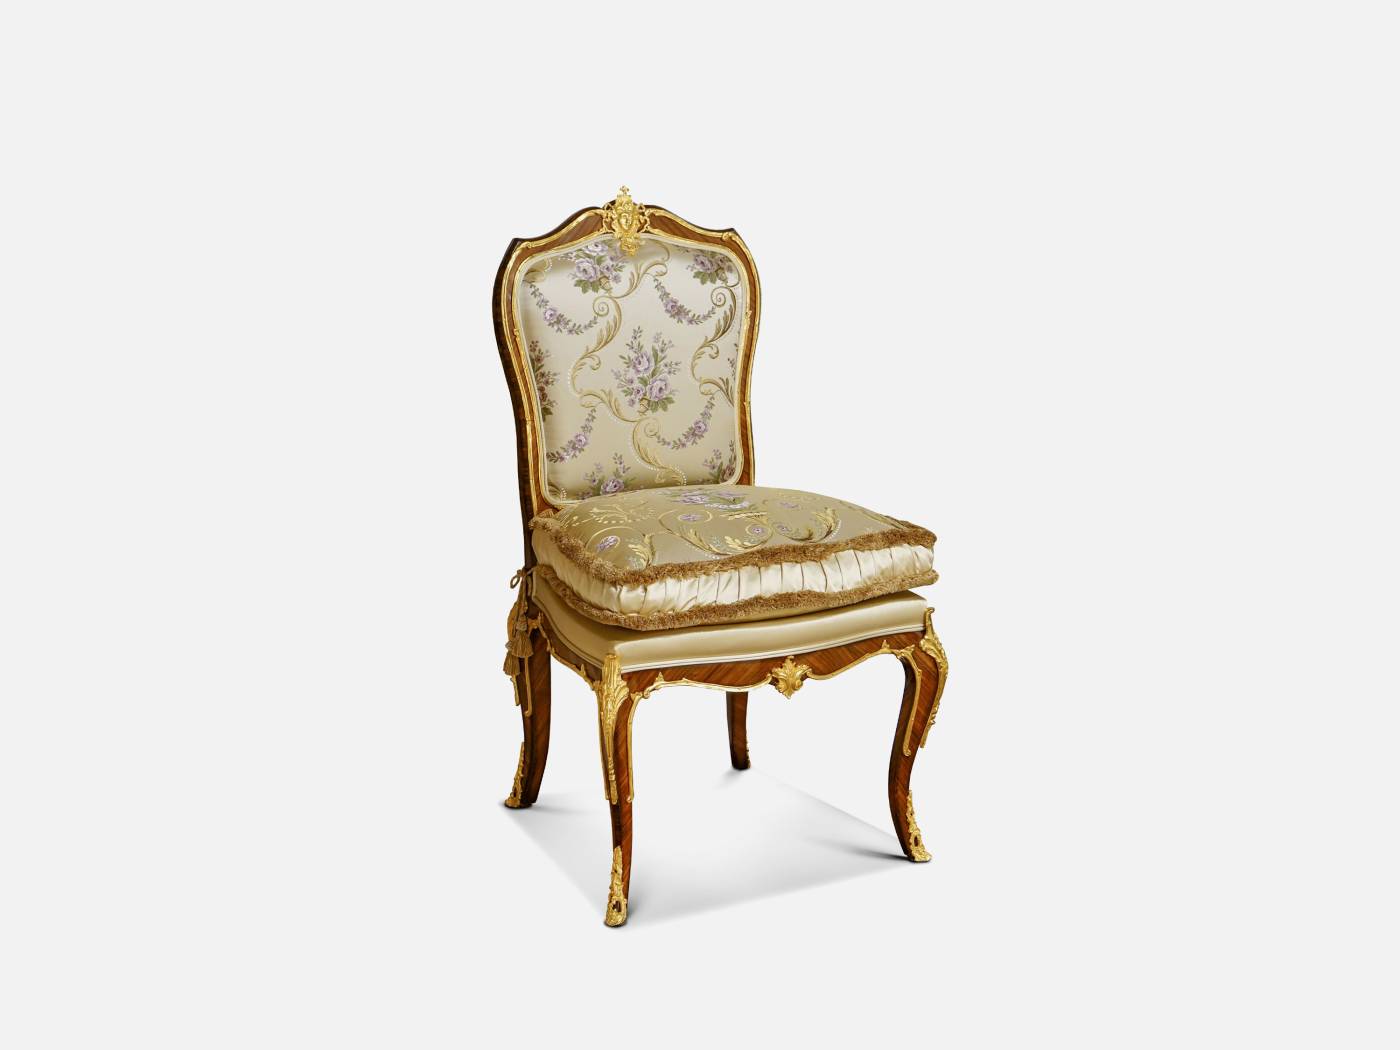 ART. 1094-6 – The elegance of luxury classic Chairs made in Italy by C.G. Capelletti.